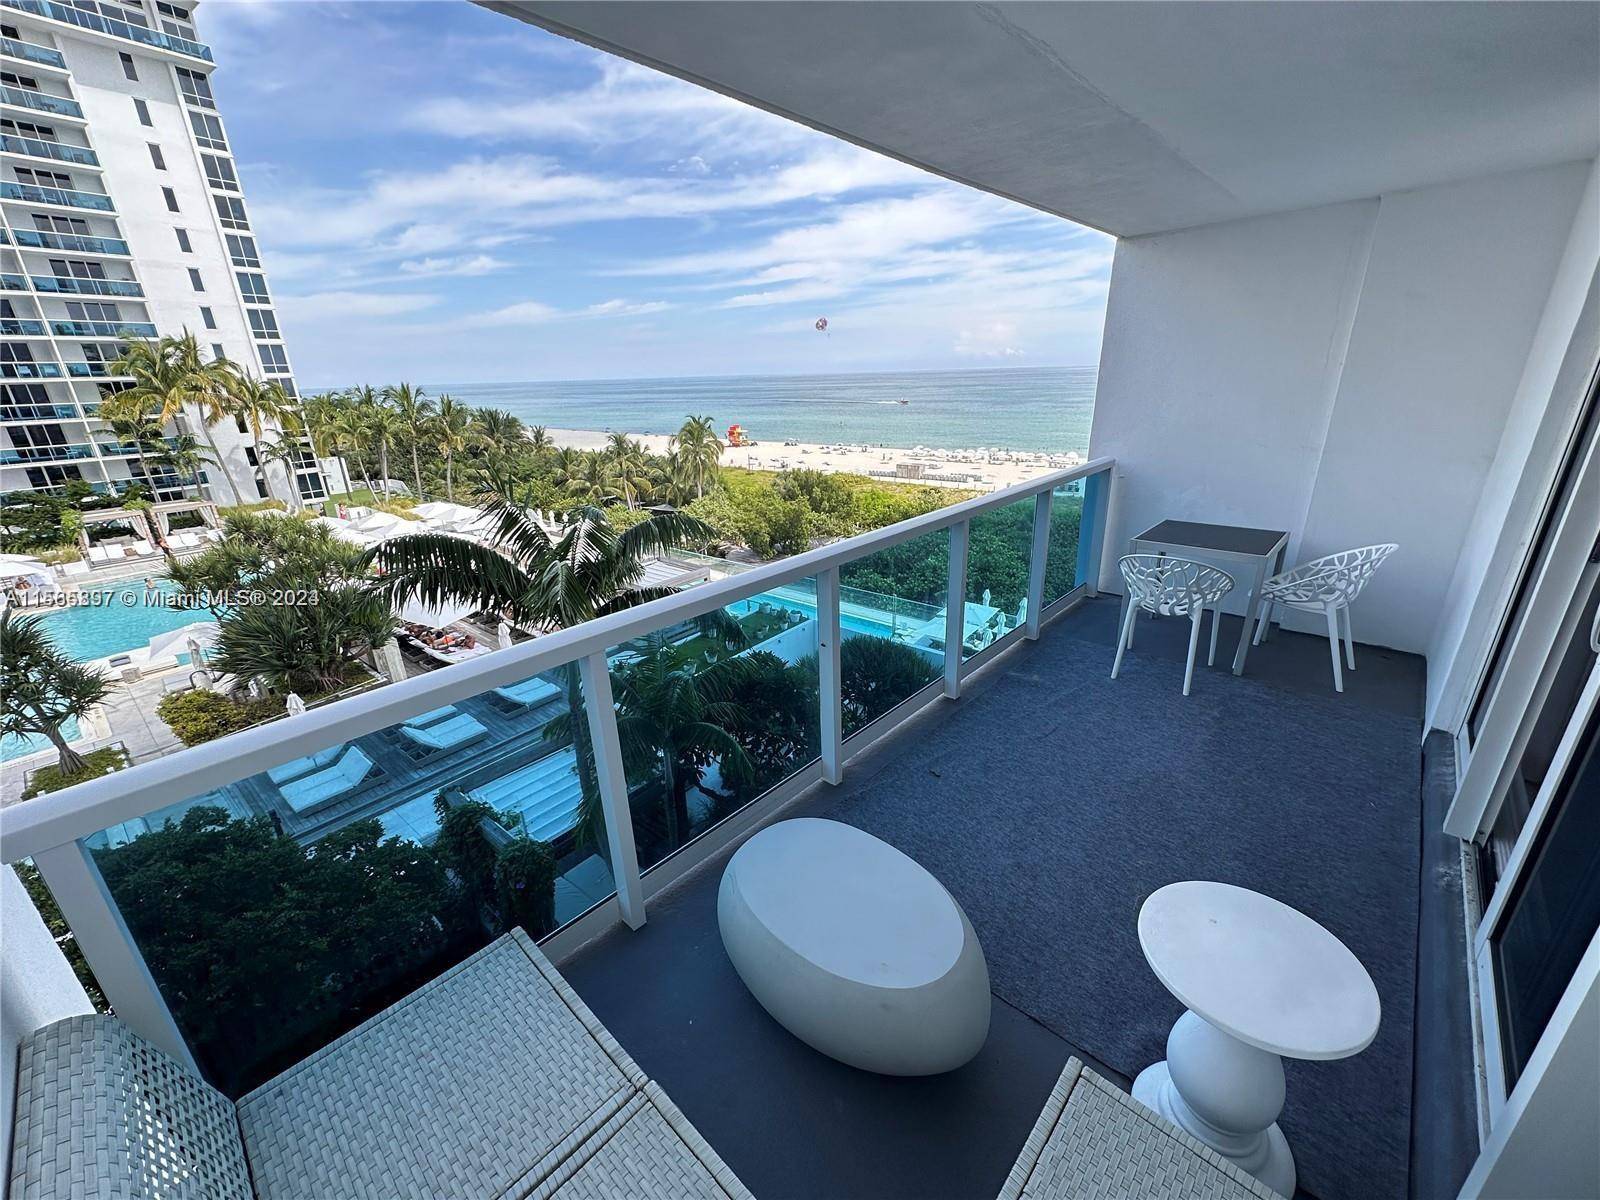 Finest oceanfront FURNISHED unit with OCEAN VIEW and LARGE BALCONY in the iconic South Beach Roney Palace.